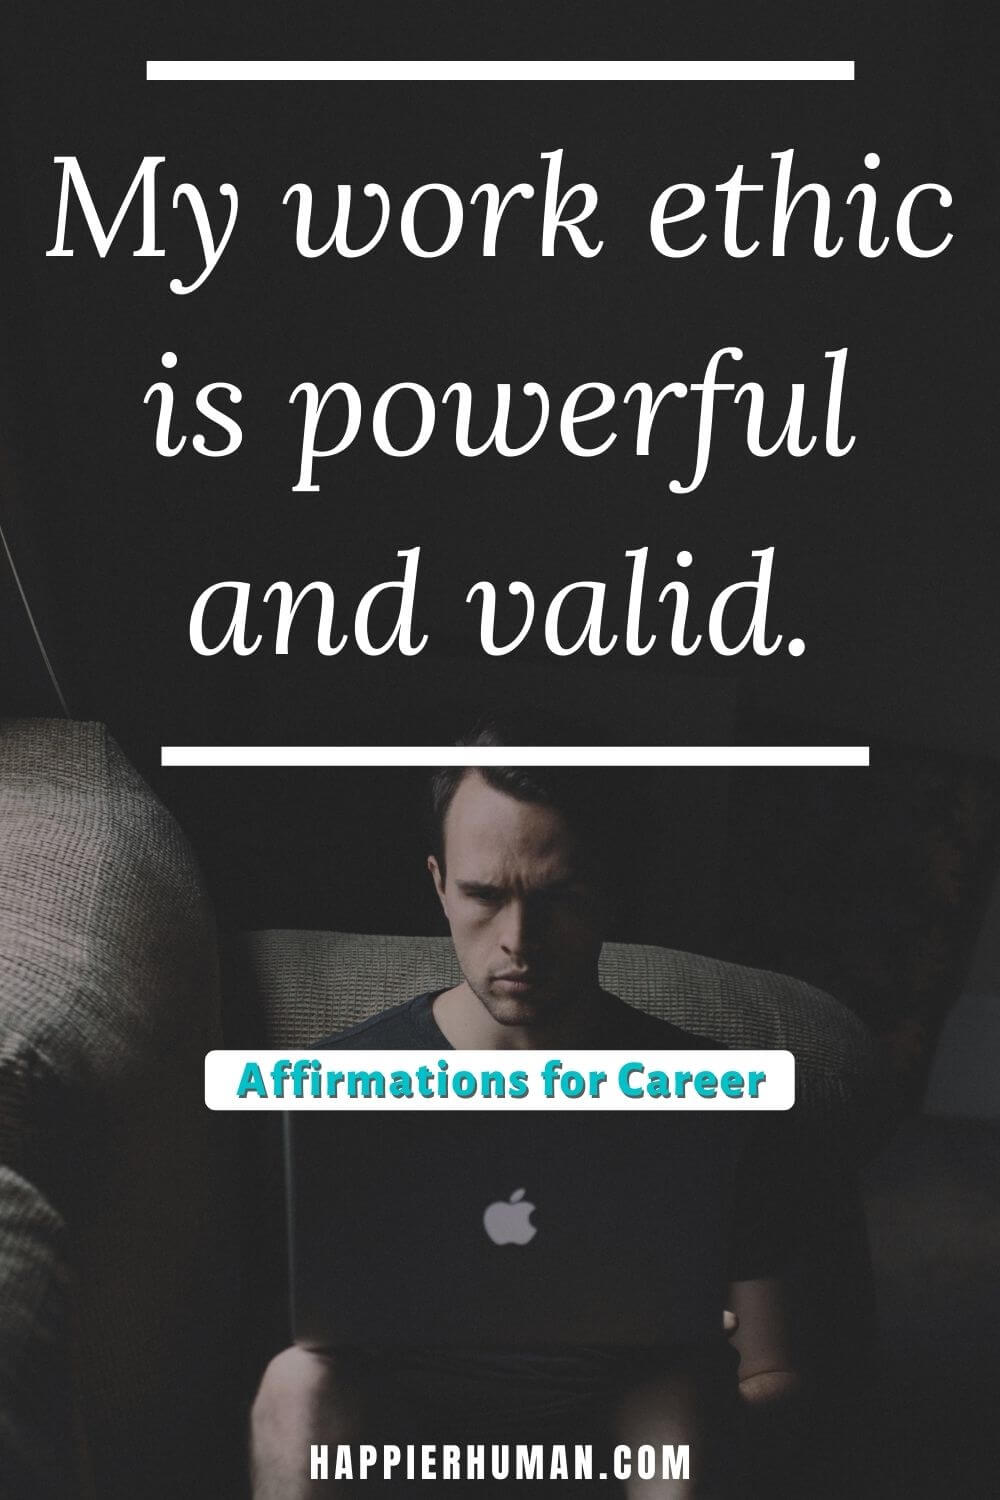 Affirmations for Your Career - My work ethic is powerful and valid. | positive affirmations for career success | positive affirmations for career growth | positive affirmations for career change